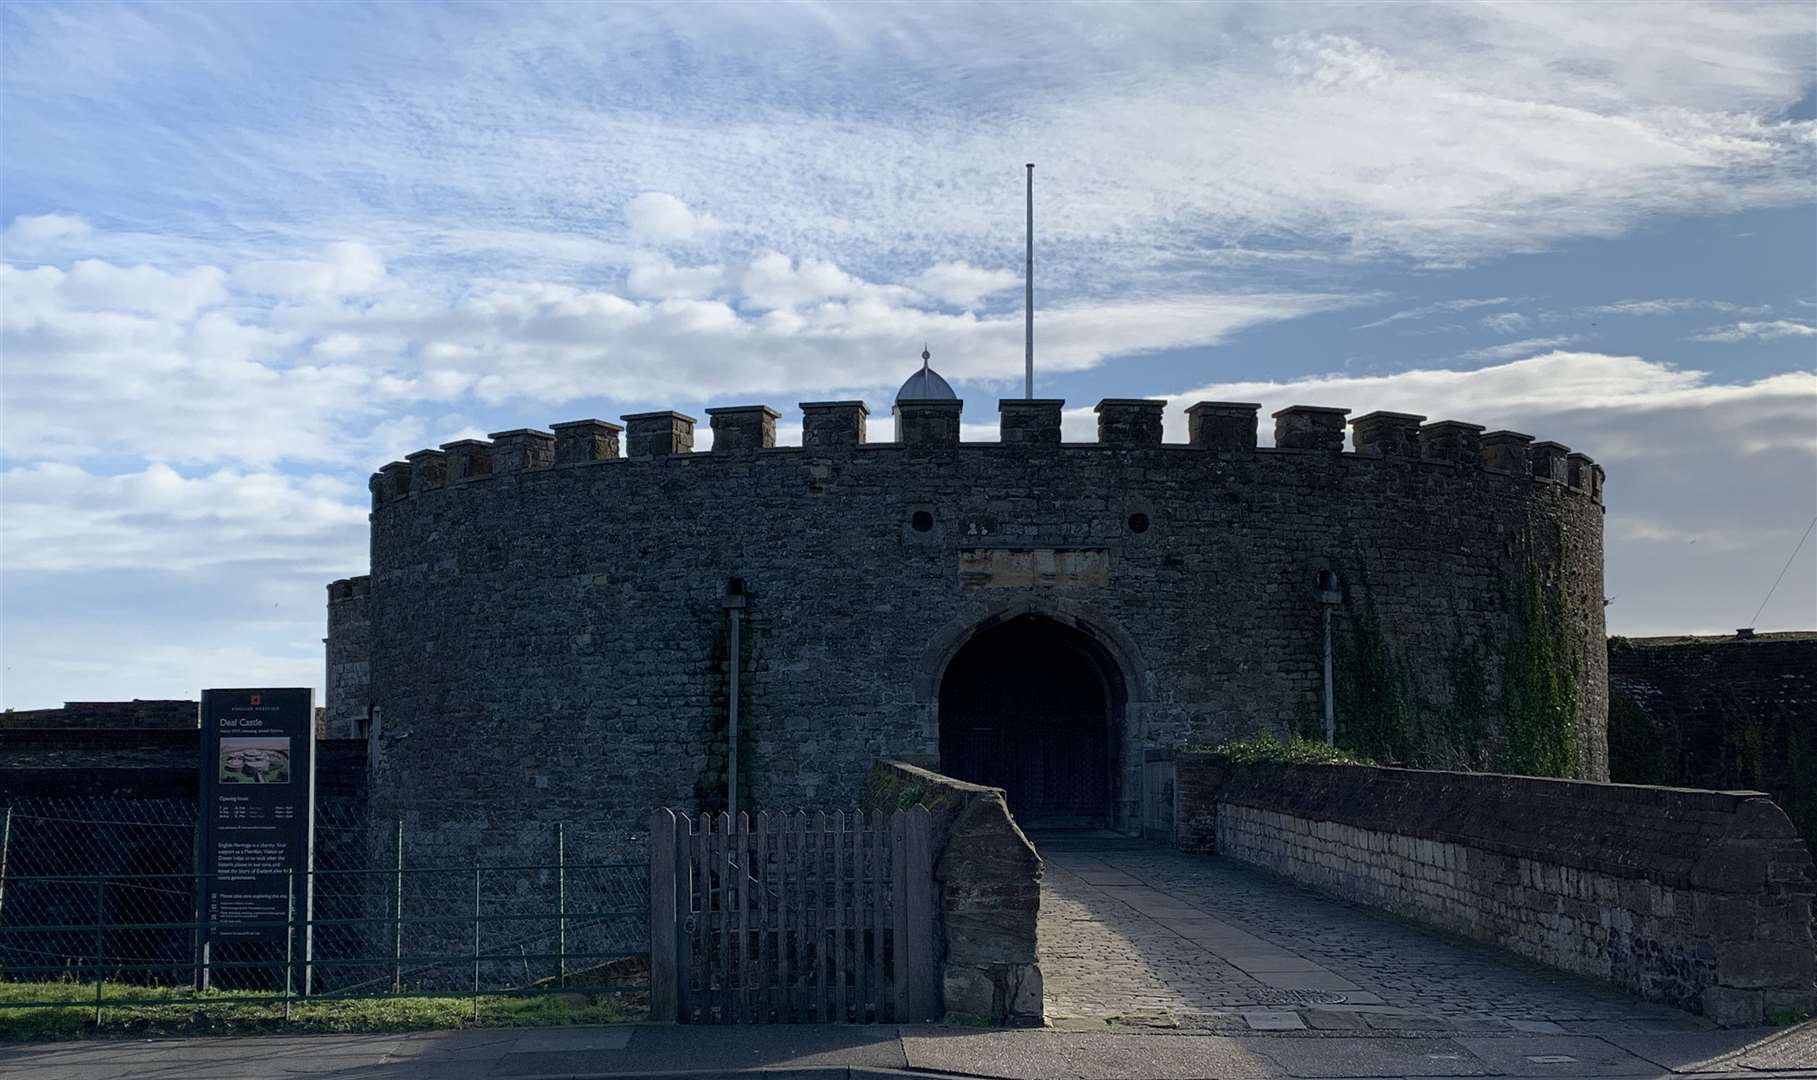 Deal Castle is another landmark that has been relocated to the fictional village of Lower Wootton